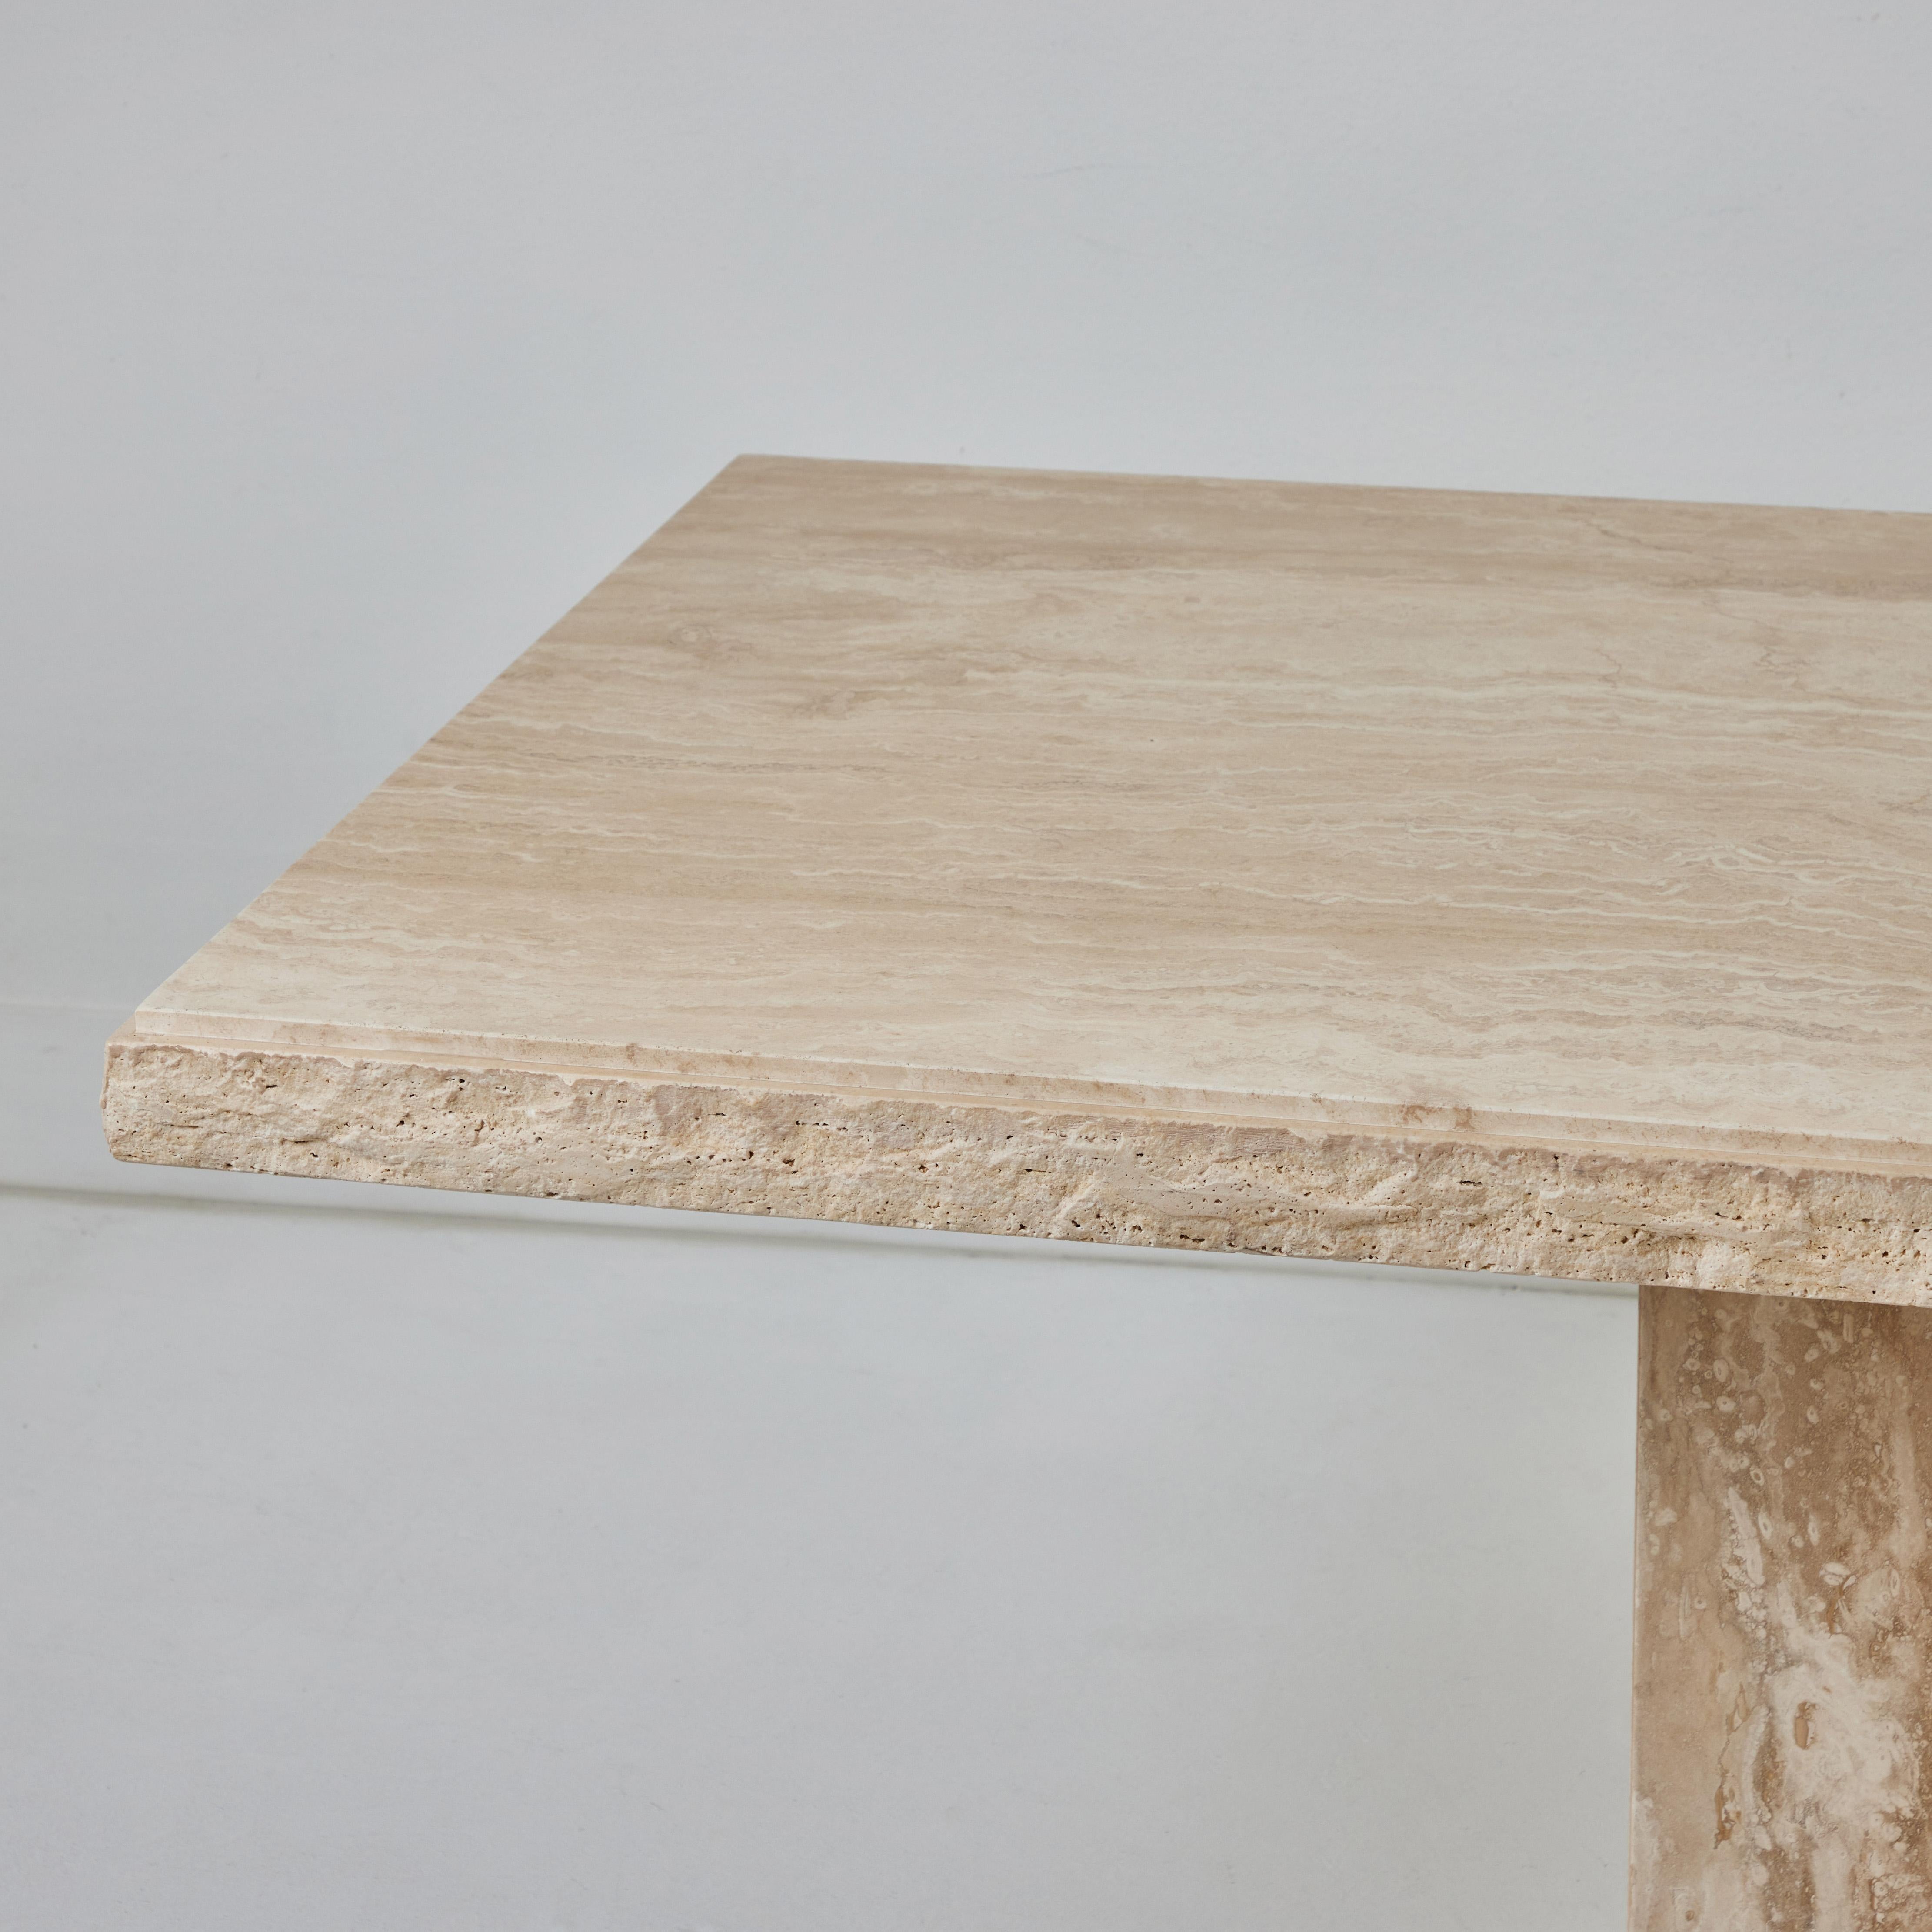 Late 20th Century A Roman Travertine Dining Table with a Quarry Edge For Sale